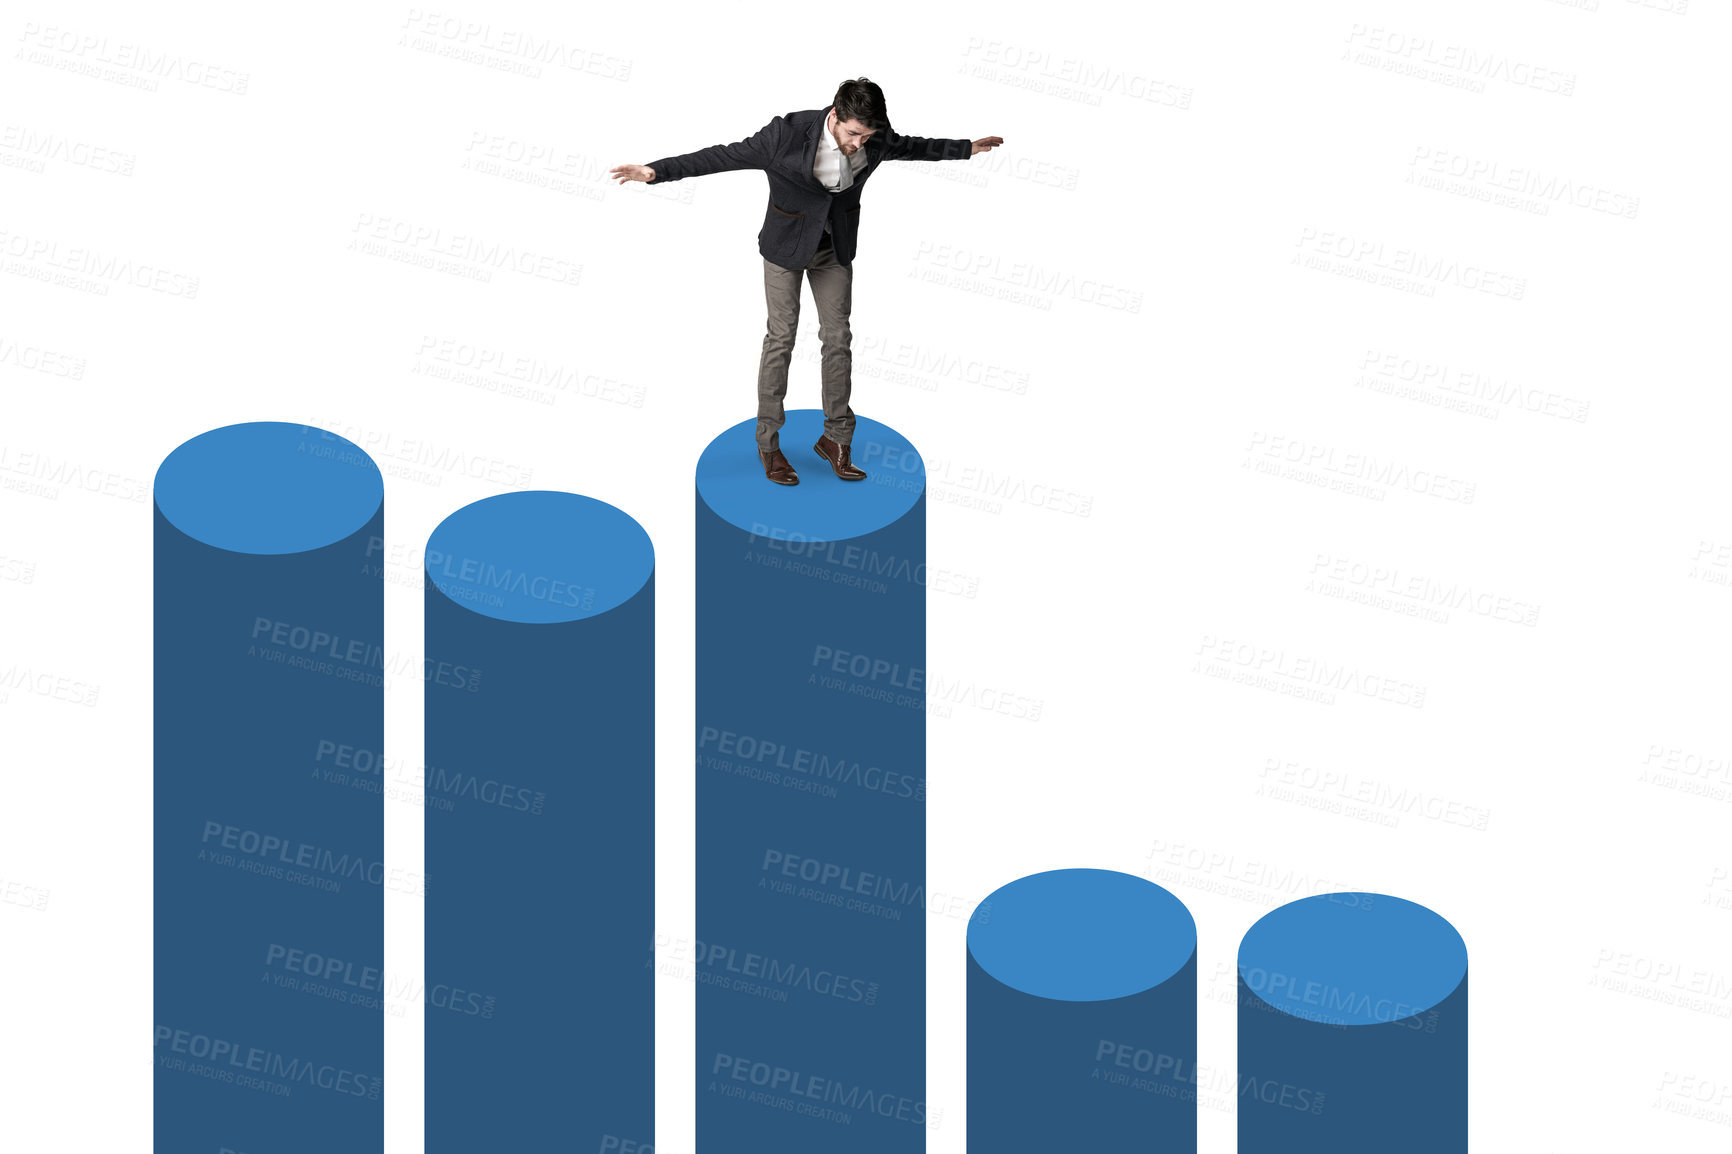 Buy stock photo Shot of a businessman balancing on top of a graph against a white background